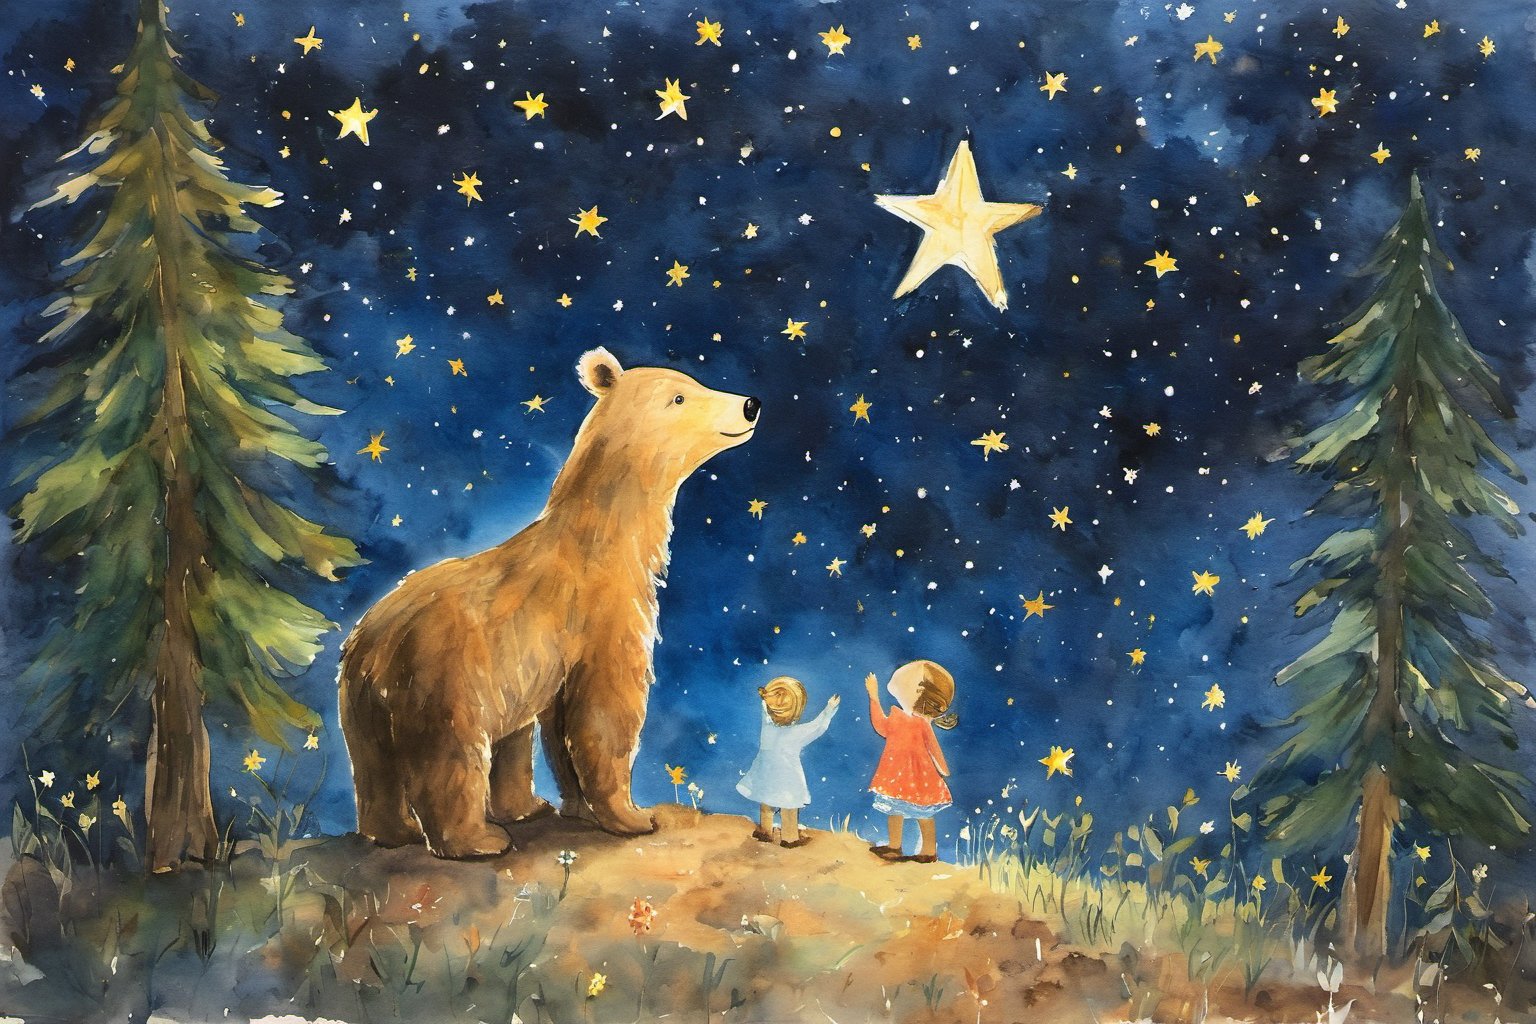 Children's painting, color painting, The star laughed softly and said, "Of course, Little Bear. I can see the whole world from up here. I see little birds flying at dawn, deer playing in the forest, and many children like you looking at the stars."
Little Bear was fascinated and asked, "Can you tell me more?"
The star continued, "Sure, Little Bear. Every star has its own name and story. Some stars are very old, they have seen many seasons. Some stars are very young, just starting to shine. We stars talk to each other and share our stories."